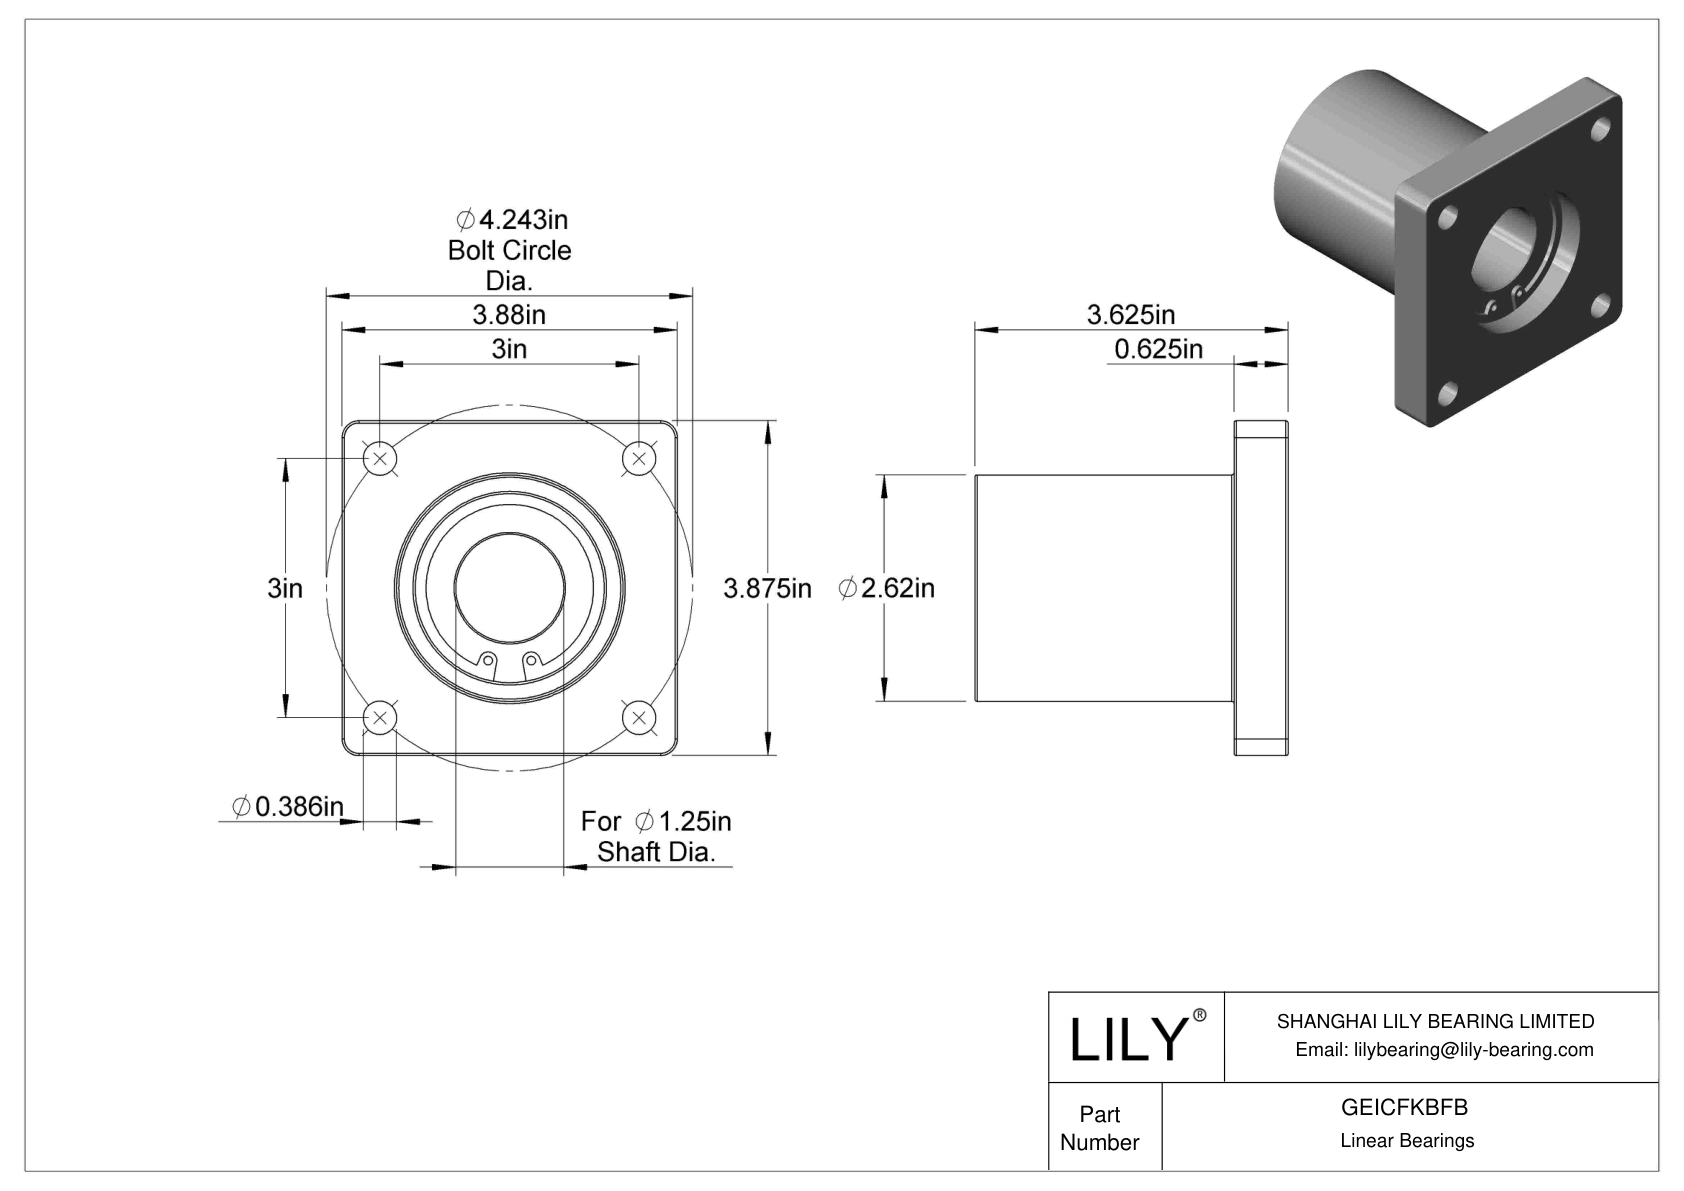 GEICFKBFB Chemical-Resistant Flange-Mounted Linear Sleeve Bearings cad drawing